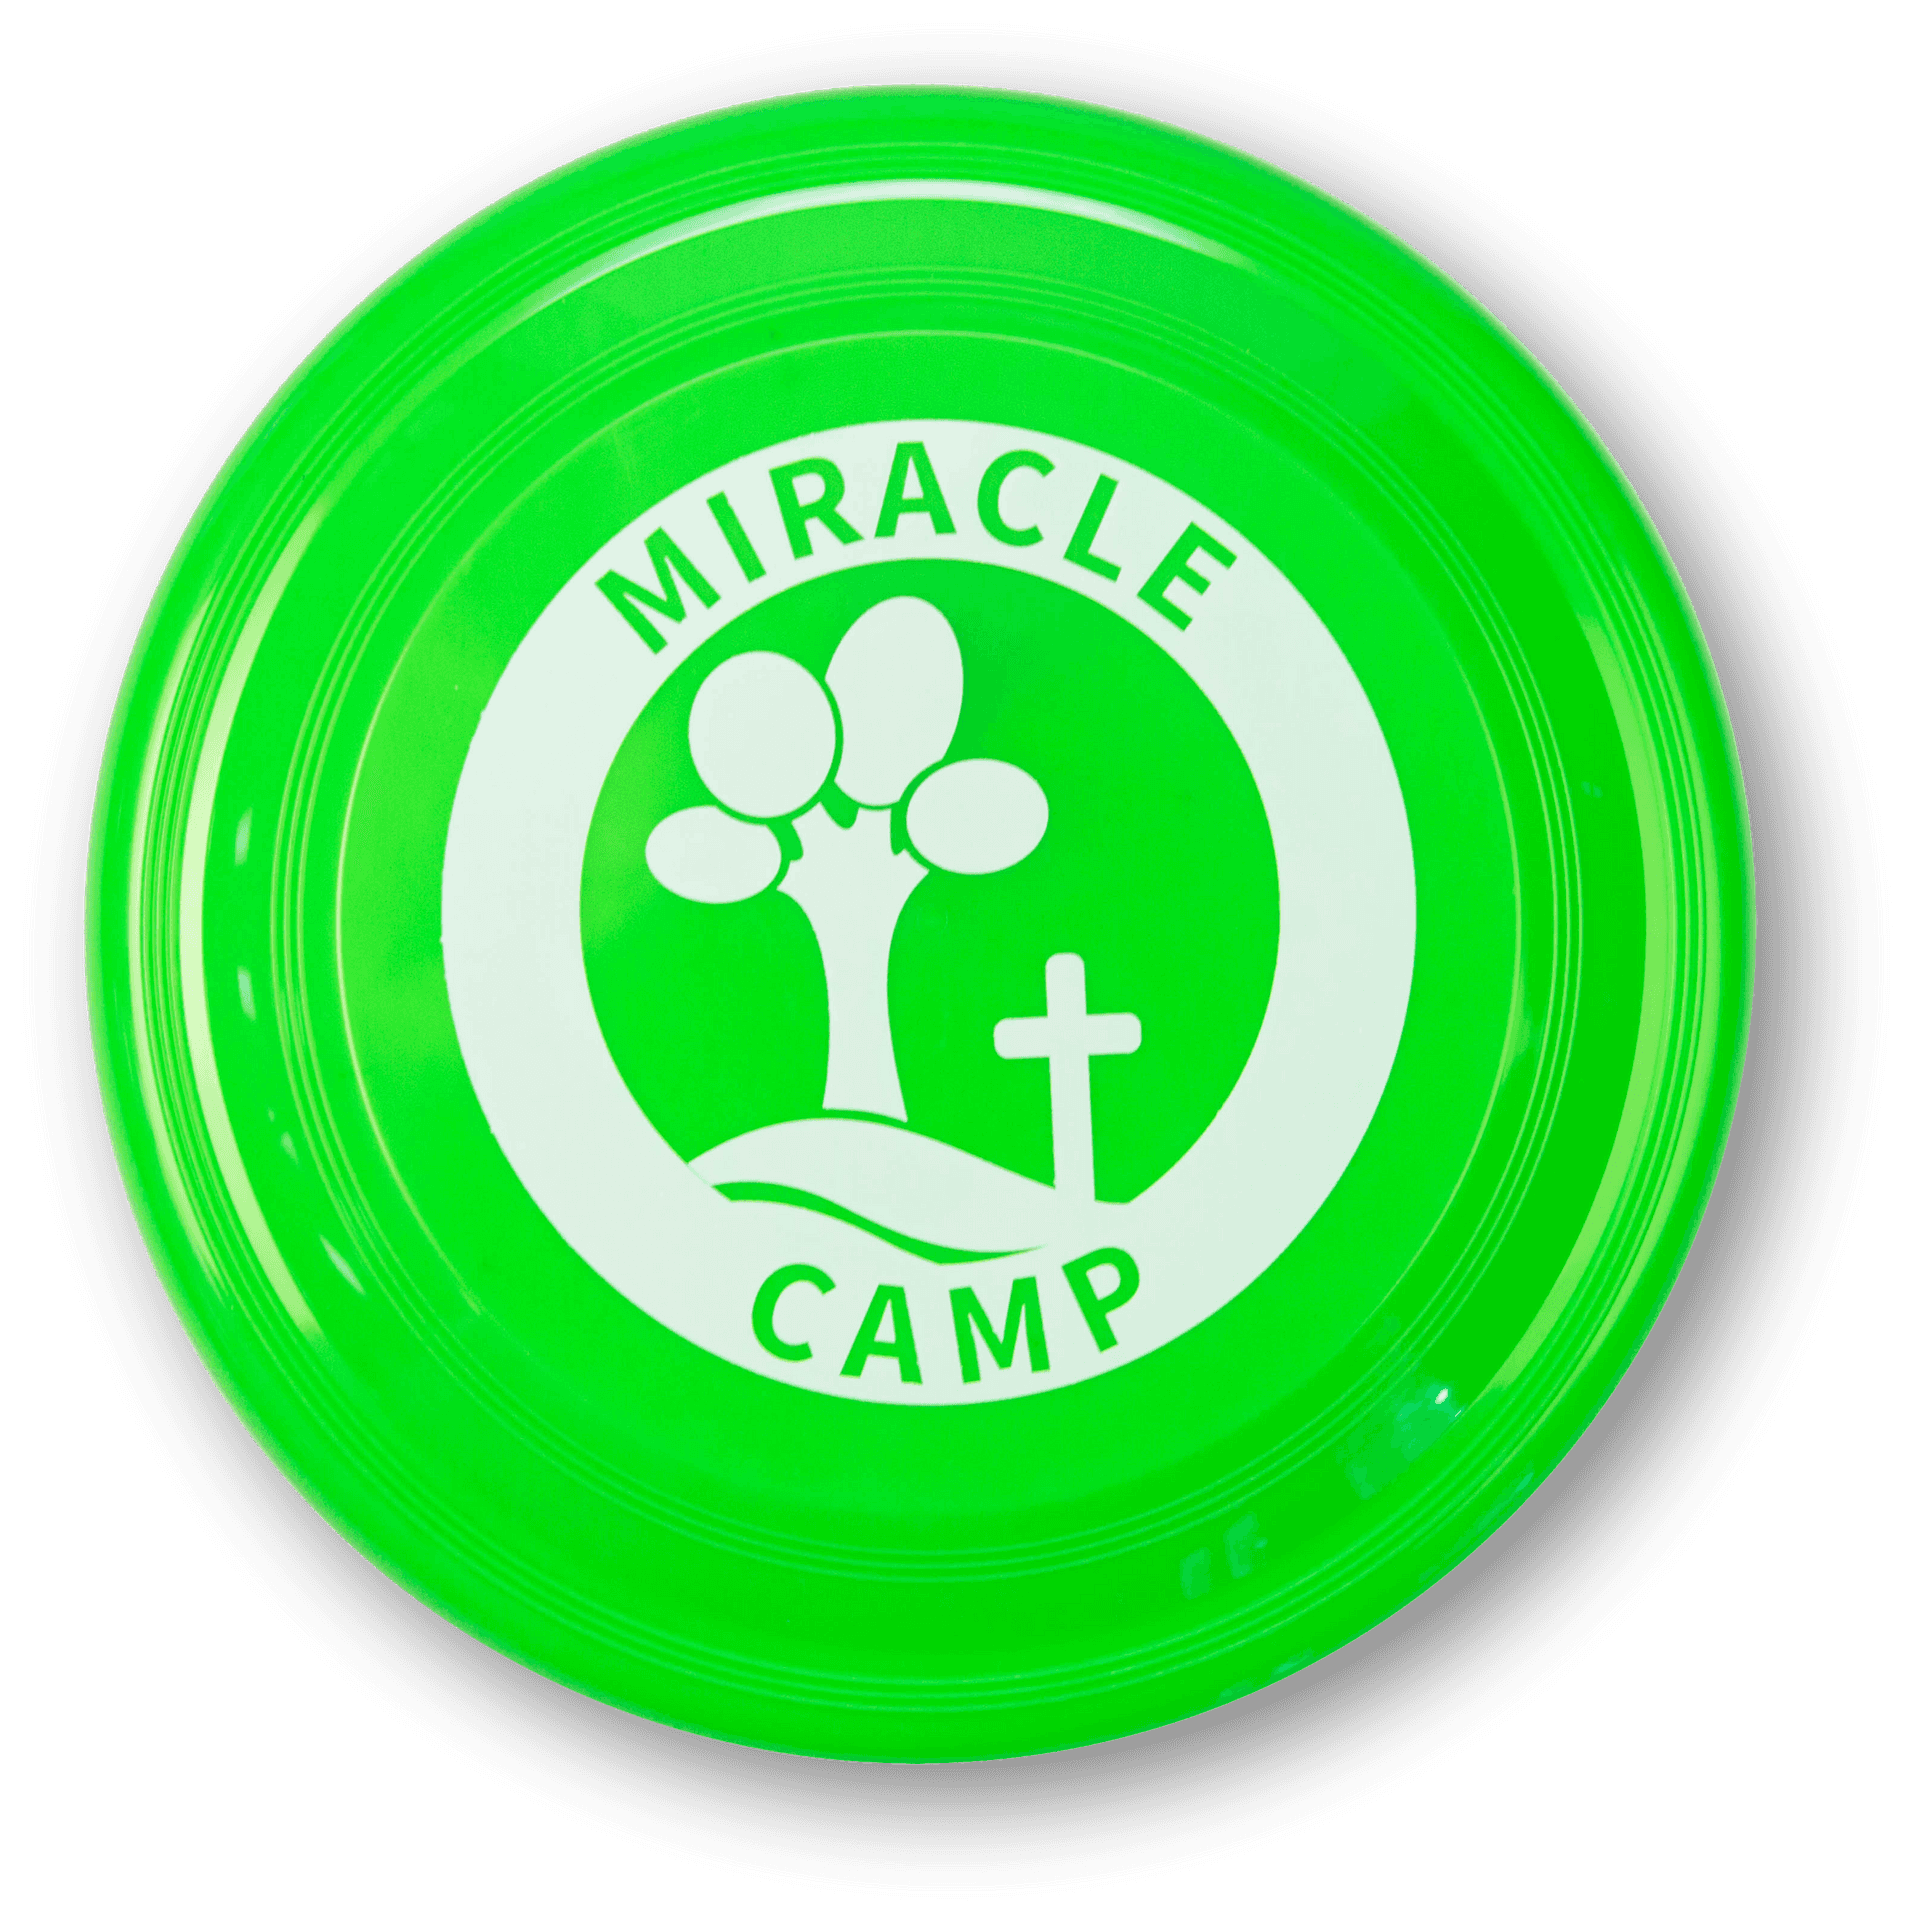 Green Miracle Camp Frisbee.png PNG